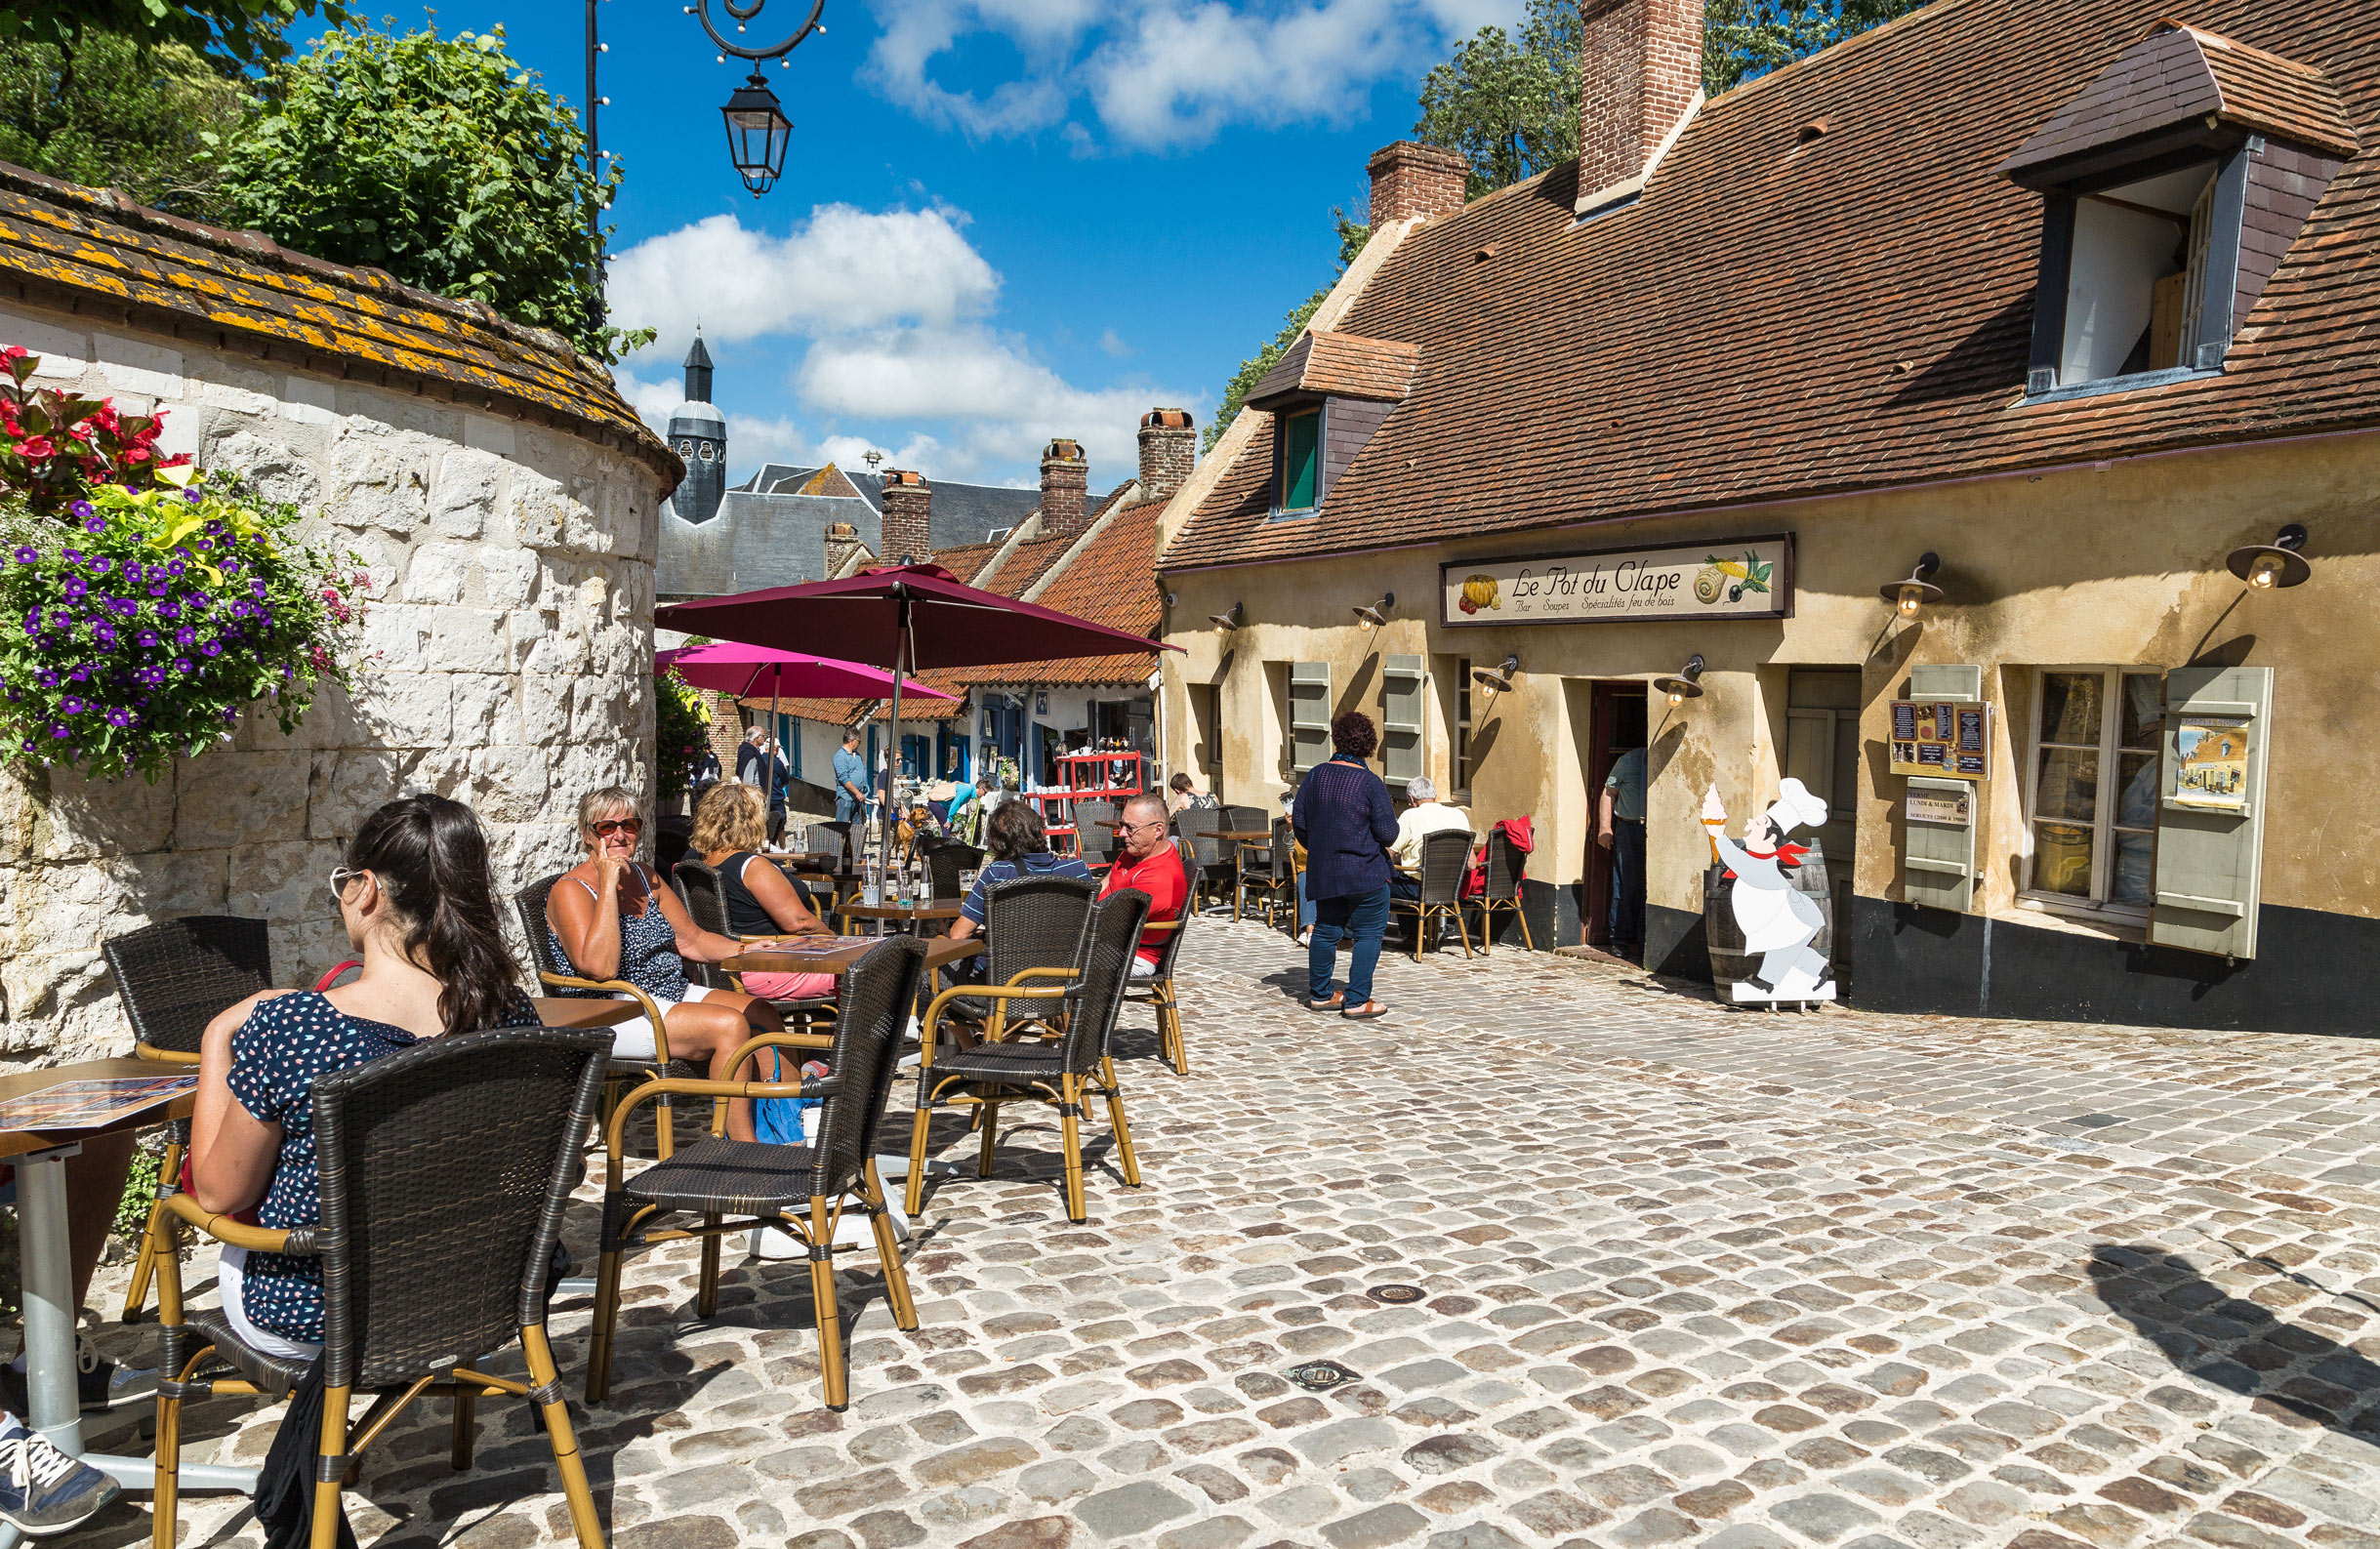 The charming walled town of Montreuil-sur-Mer is within easy reach of Maison de Plumes in Heuchin